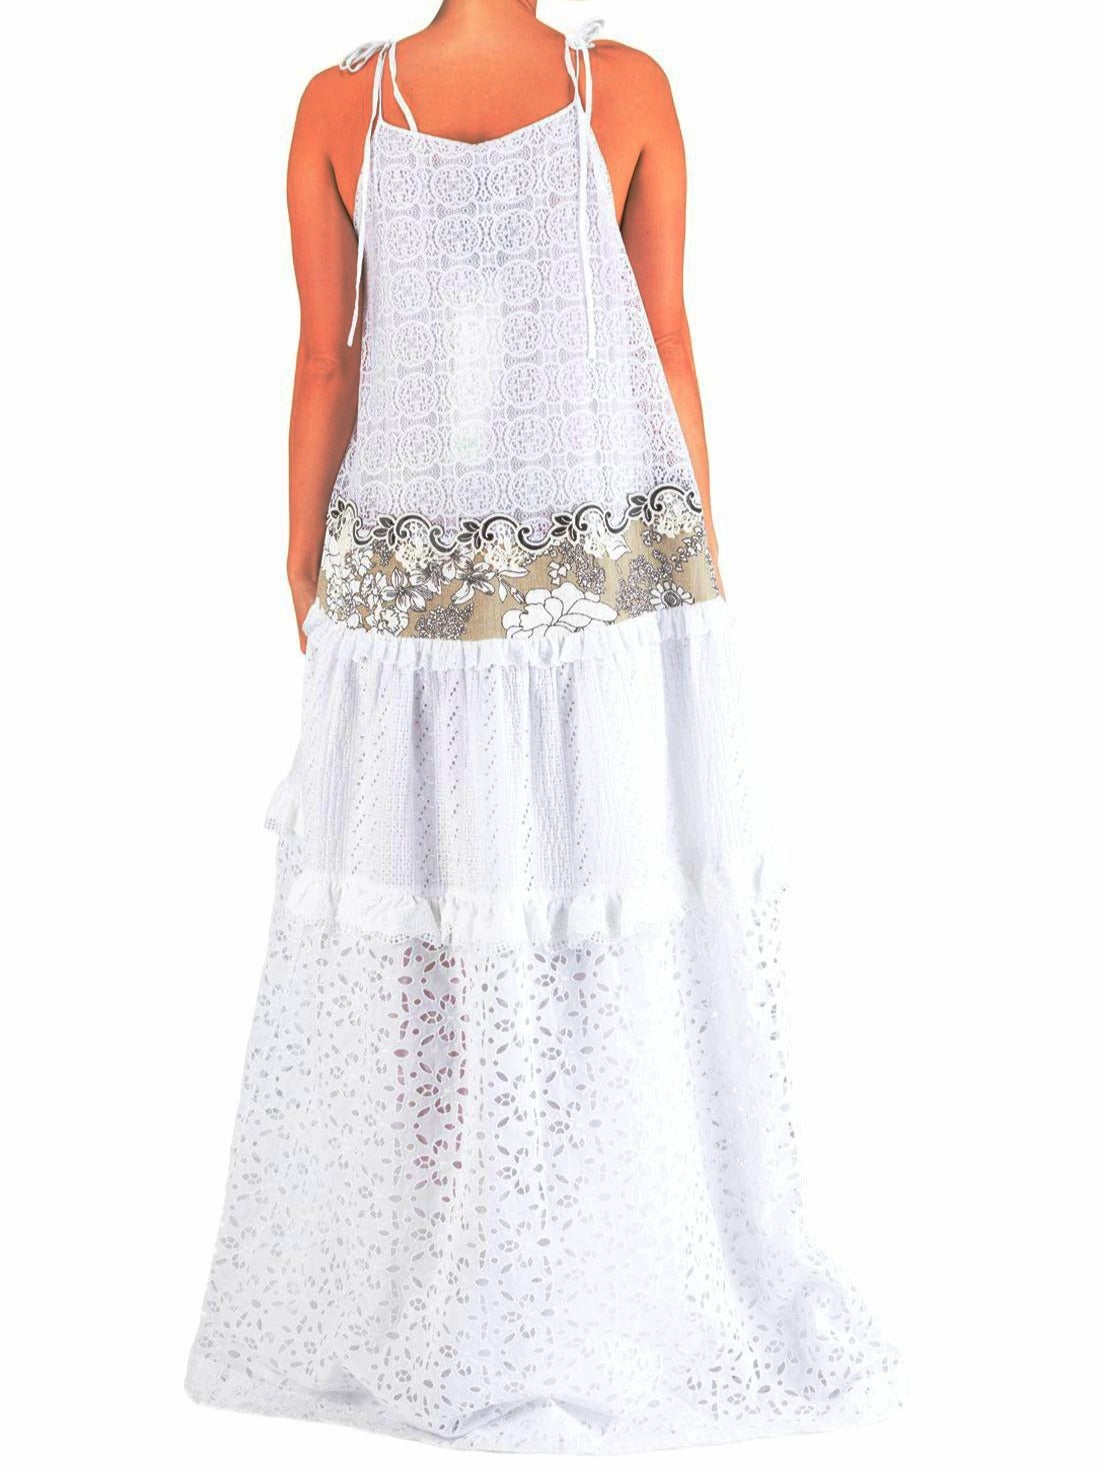 Pearls White Dress - 80% off